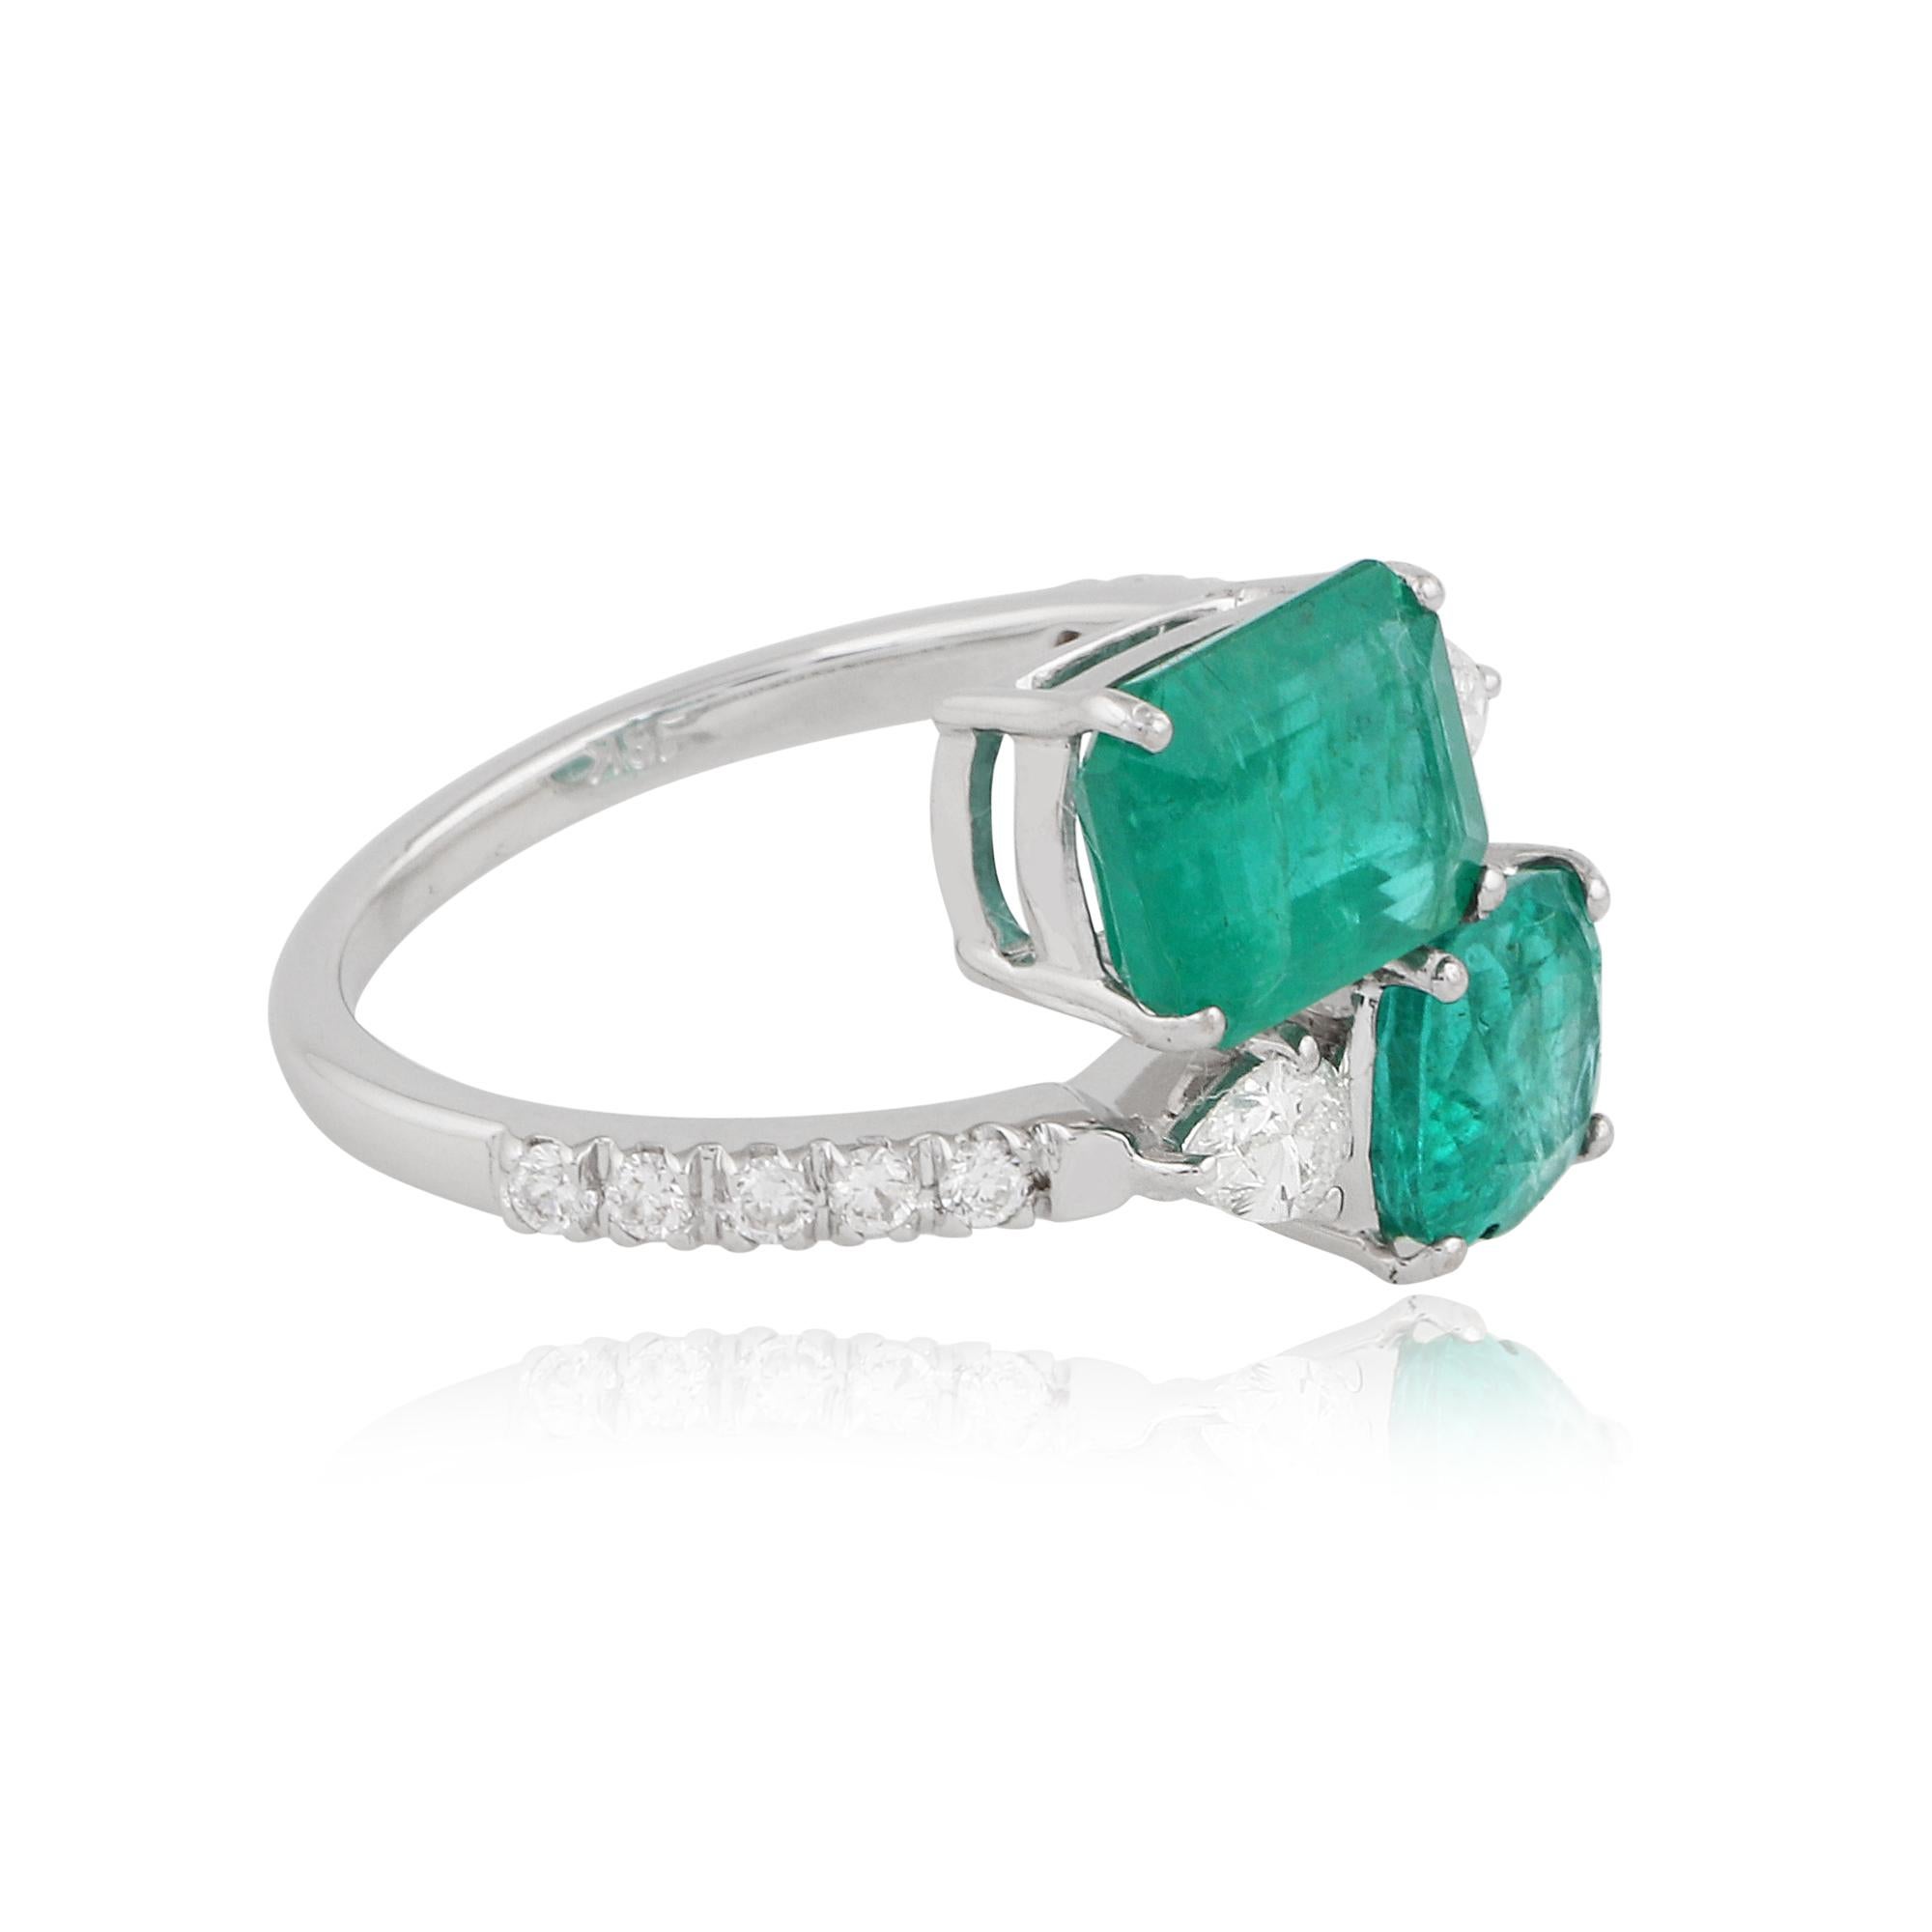 For Sale:  Natural Emerald Gemstone Wrap Ring Diamond Solid 18k White Gold Fine Jewelry 2